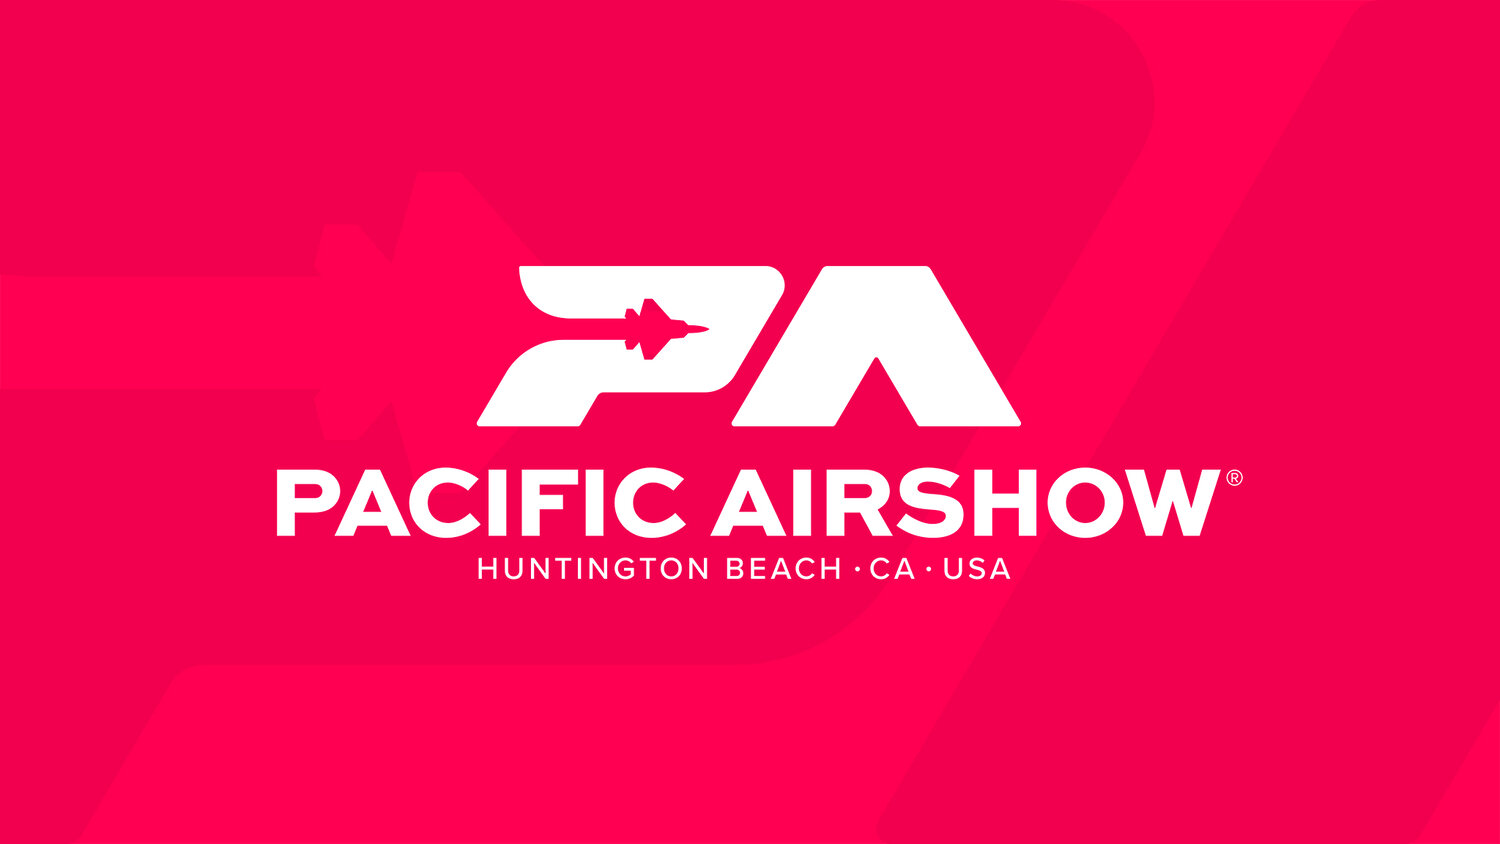 www.pacificairshow.com